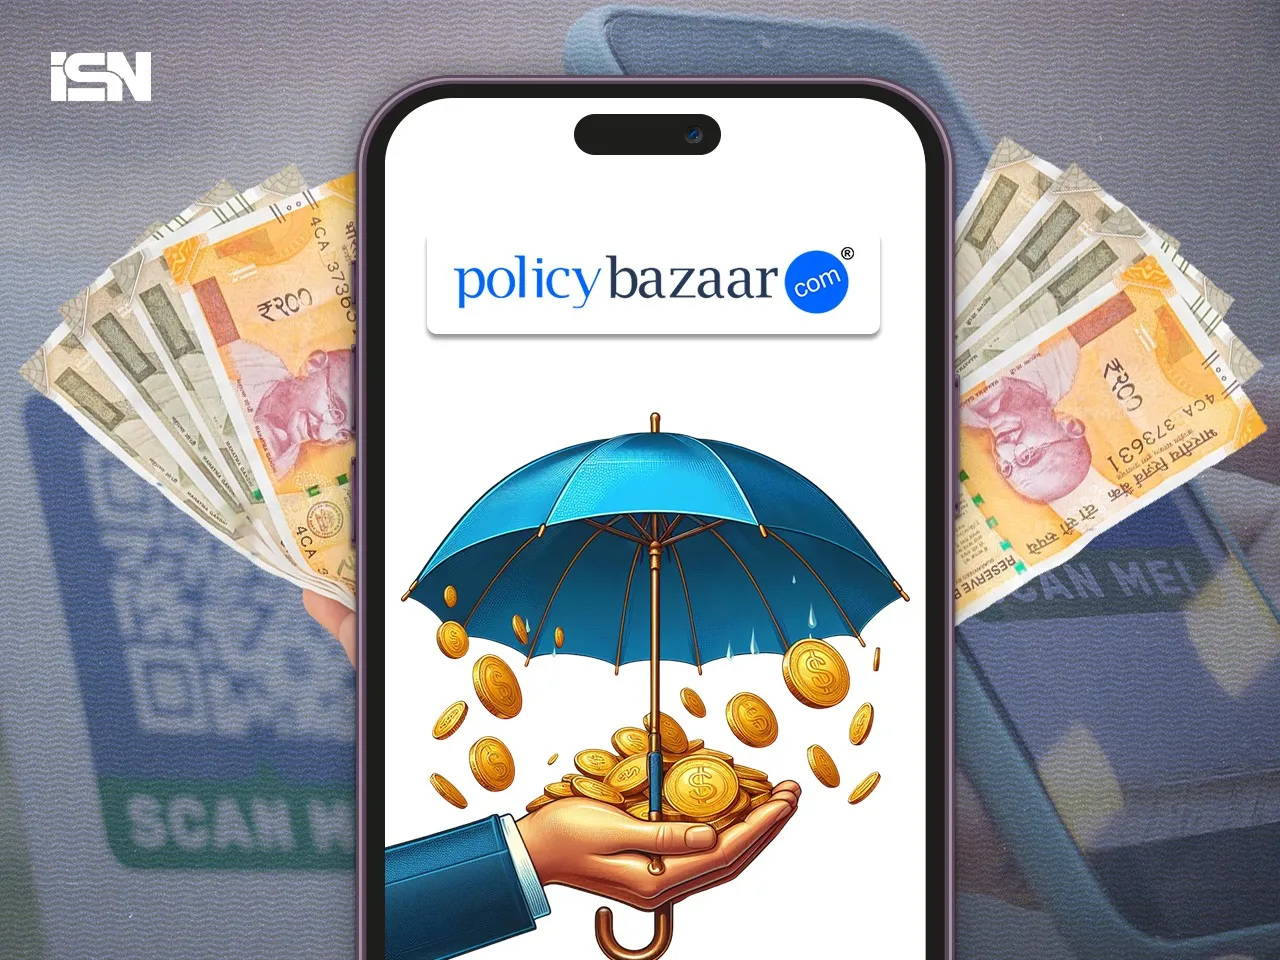 Policybazaar's parent company to launch a new payment aggregator subsidiary